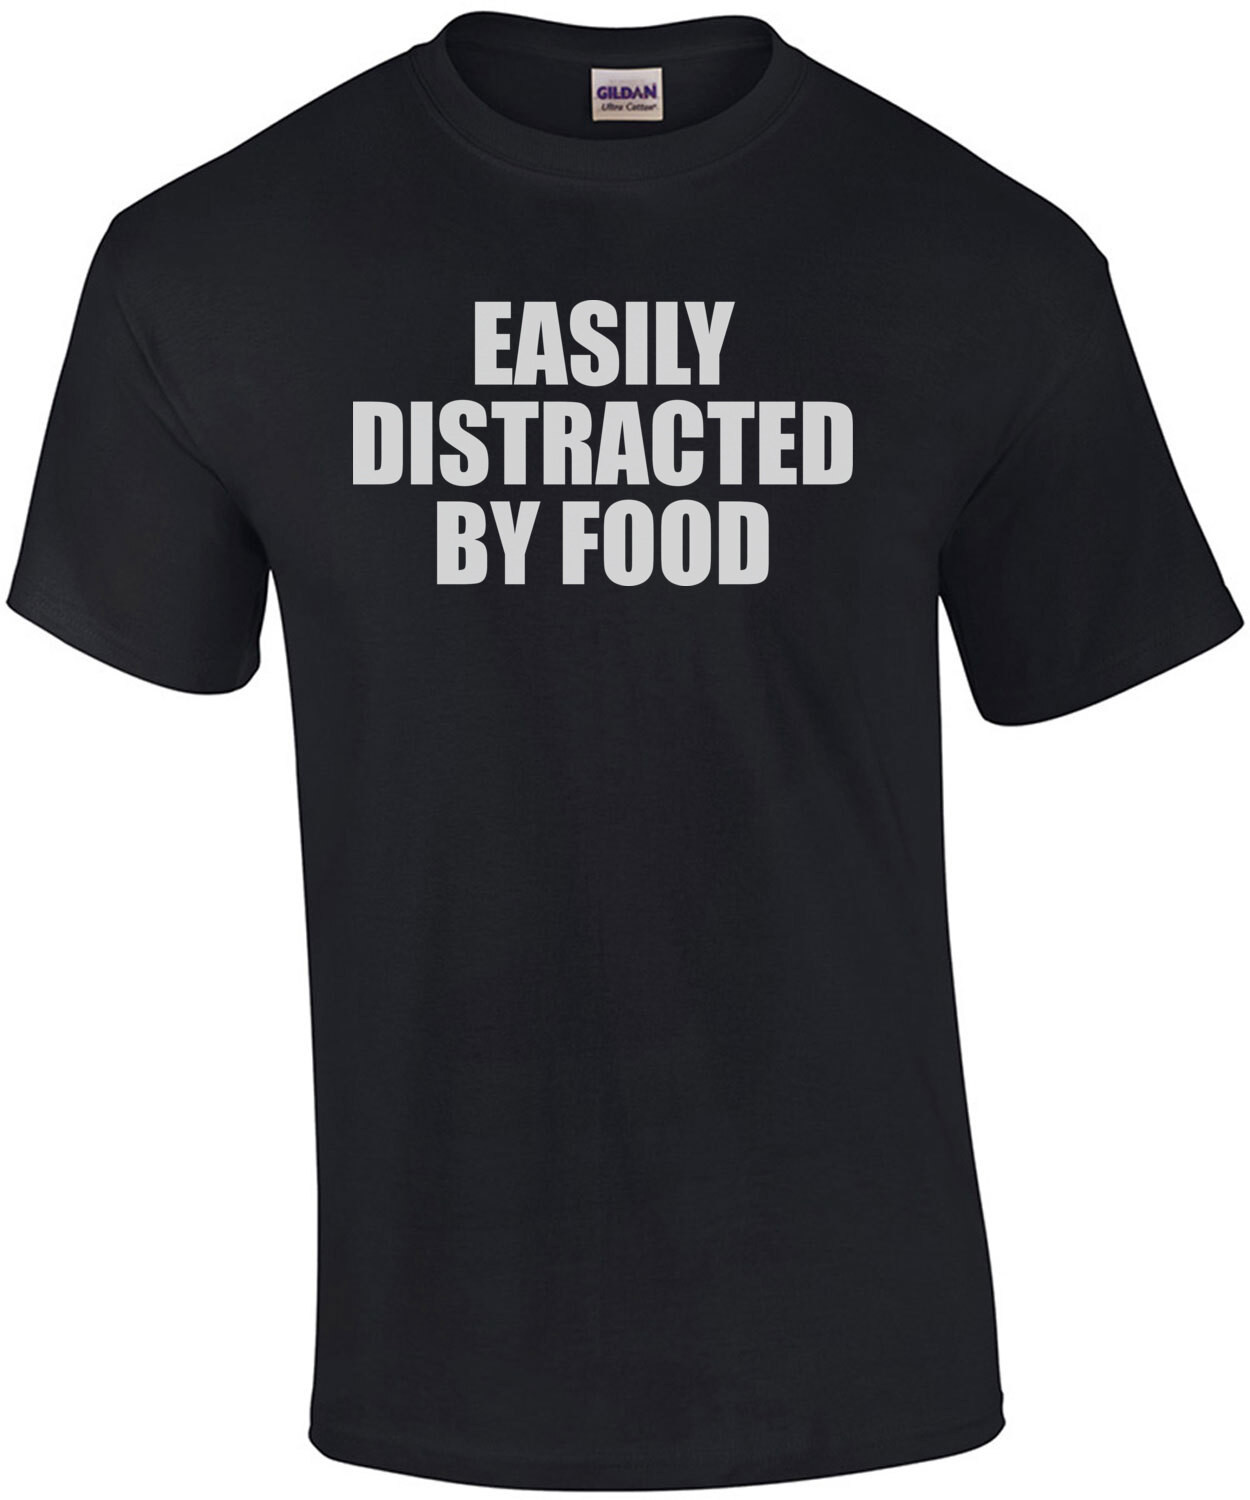 EASILY DISTRACTED BY FOOD - Funny eating fat guy t-shirt